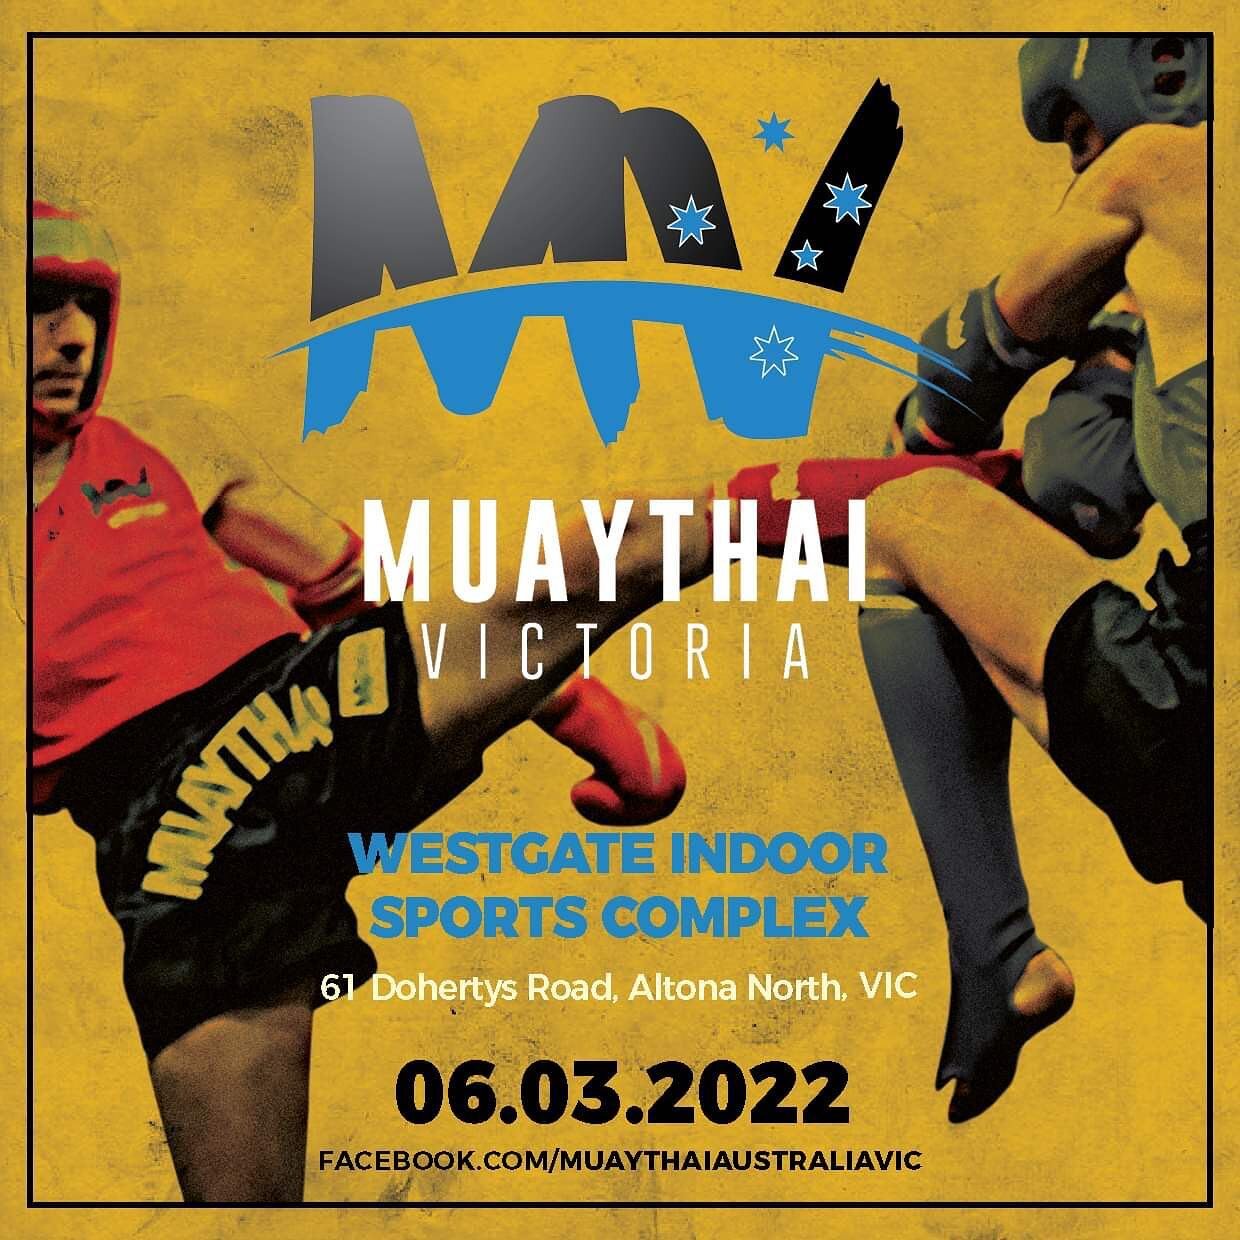 Next fight show! 🔥🥊

Finalising the card - entries still open!

Event Date: Sunday 6th March 
Weigh In: 9am Sunday 6th March
First Fight: 12pm Sunday 6th March 
Doors Open: 11am for spectators 
Entry: $30 at the door. 

#muaythai #muaythaivictoria